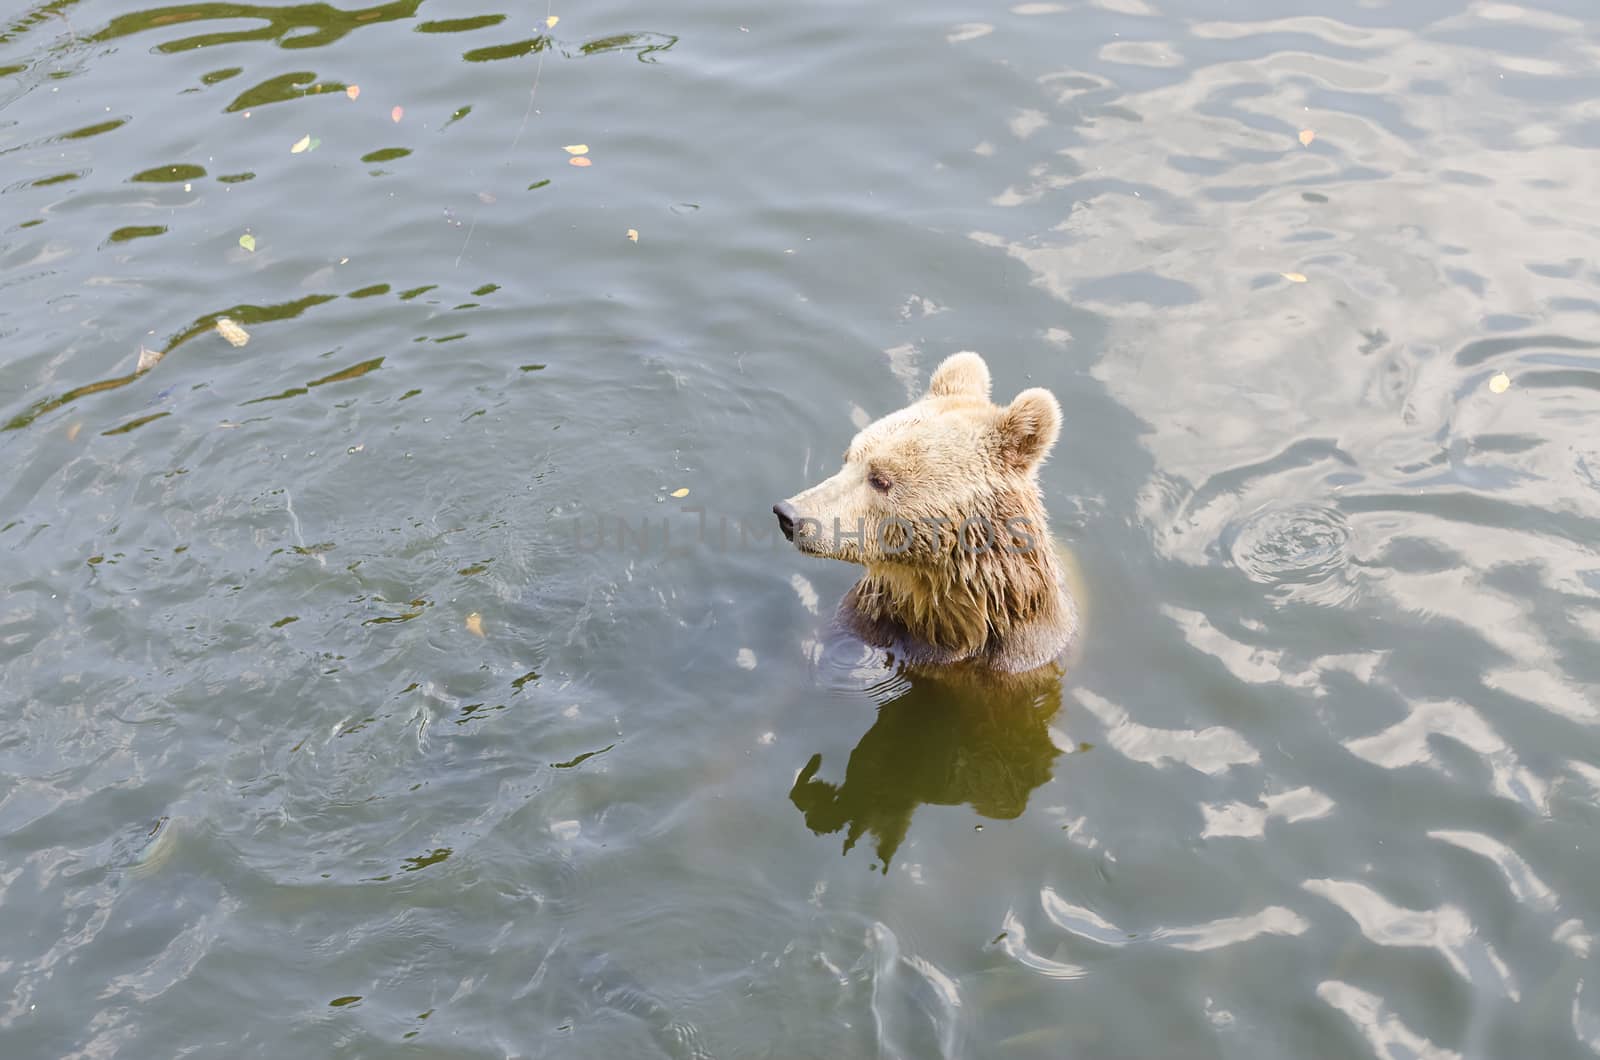 A brown bear in the forest. Big Brown Bear. Bear sits on a river. Ursus arctos.